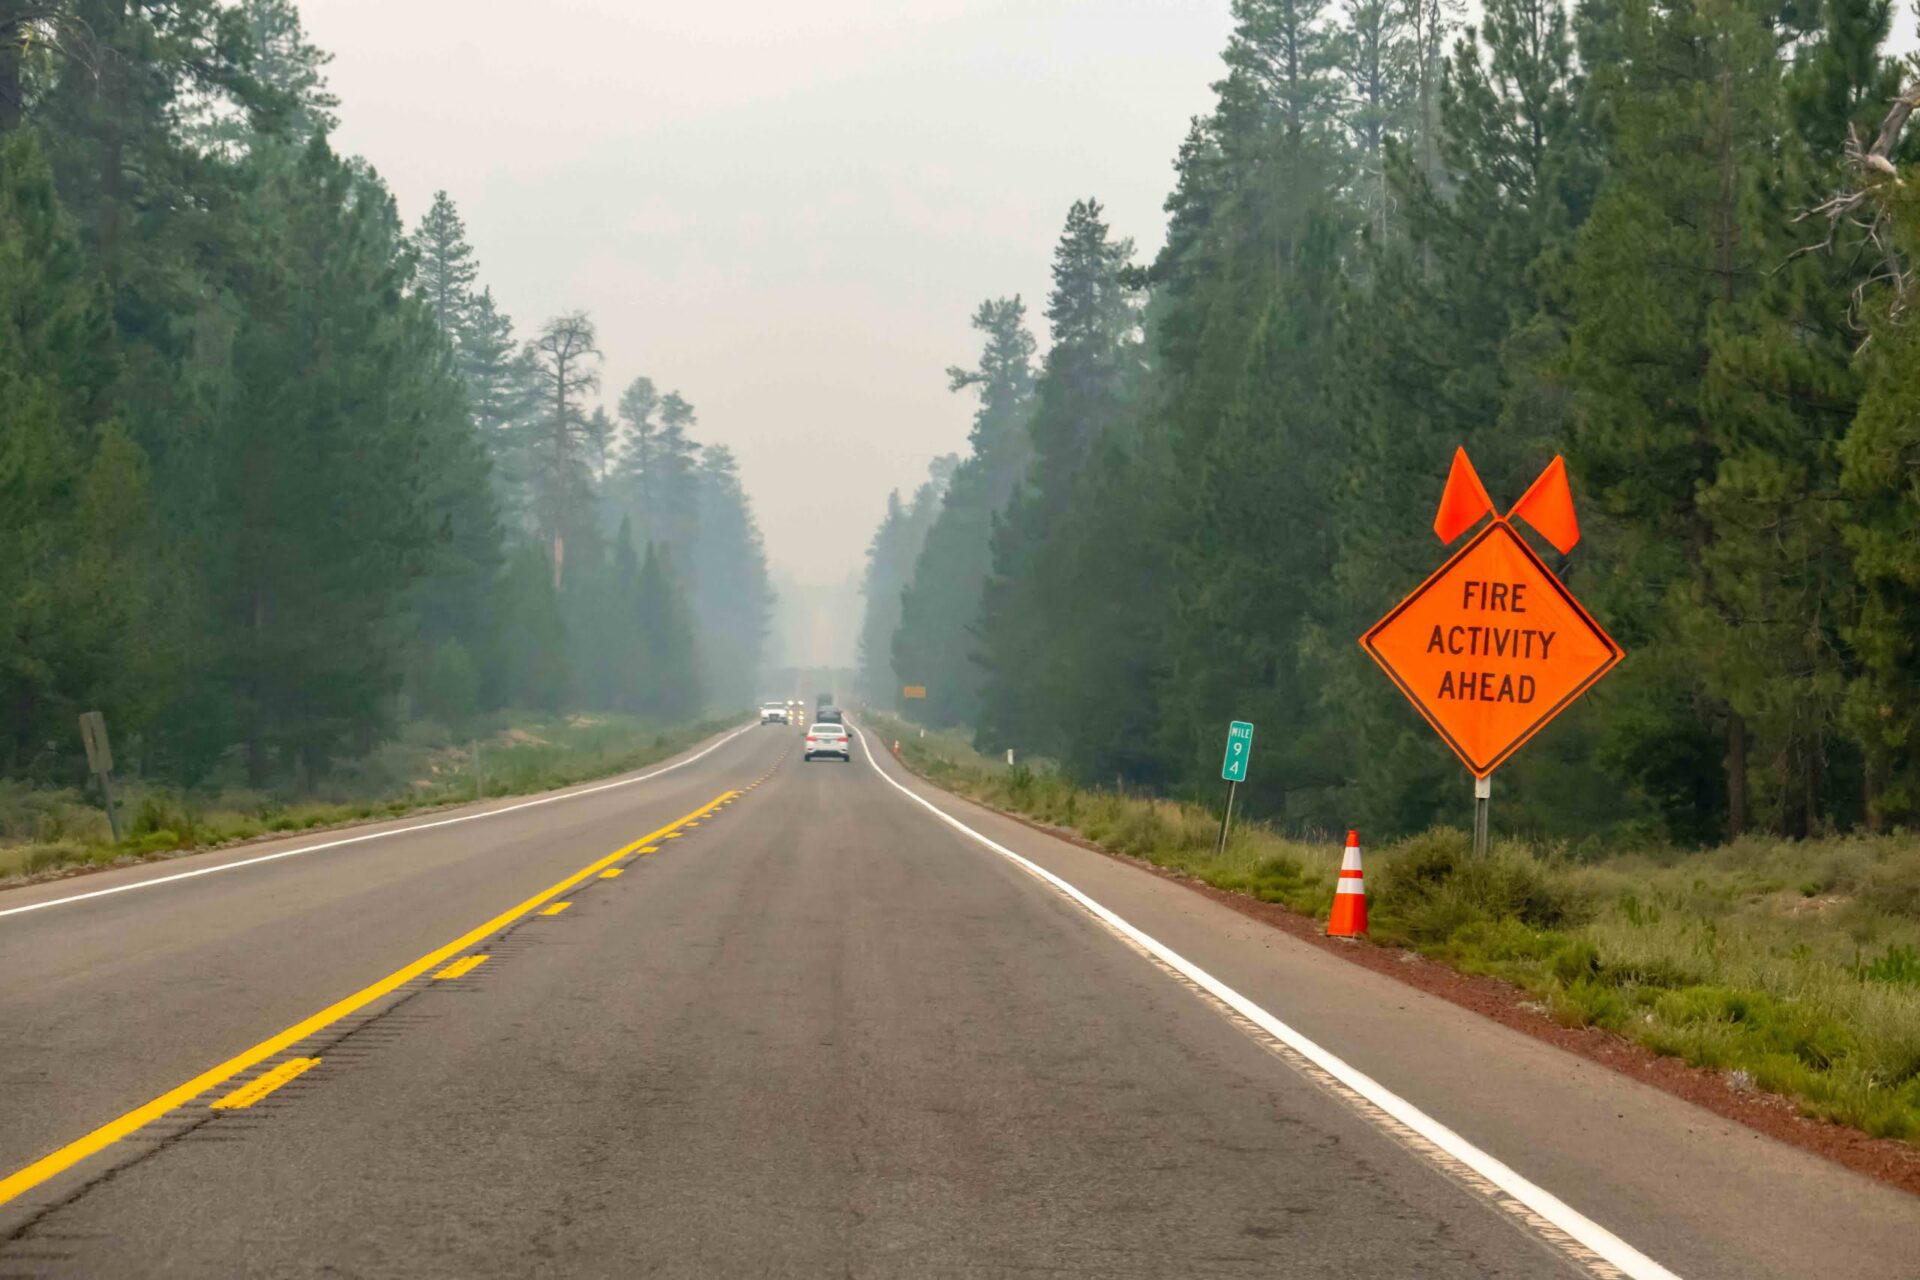 Highway and Permit Office Closures in OR & WA Due to Wildfires